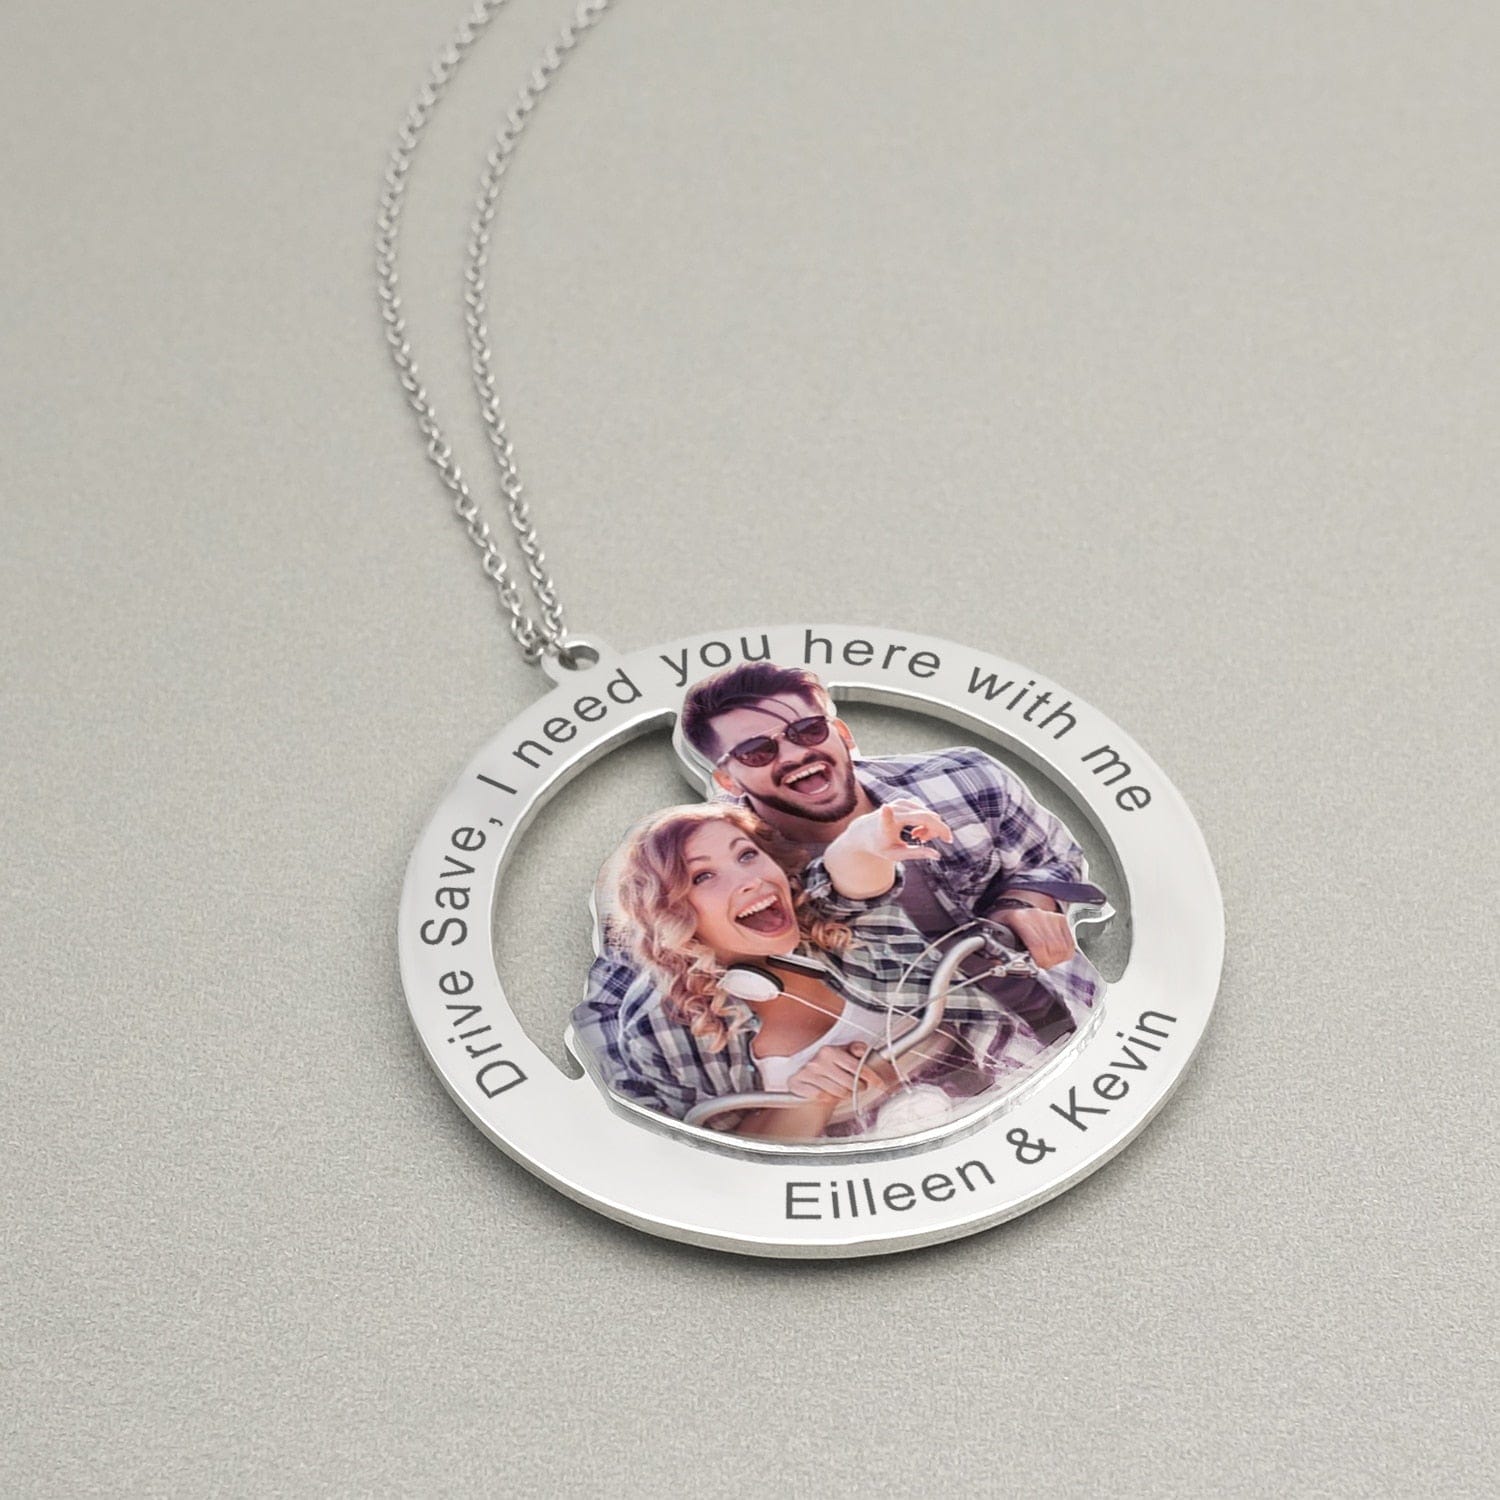 Personalized Hanging Car Ornament With Engraved Photo Charm